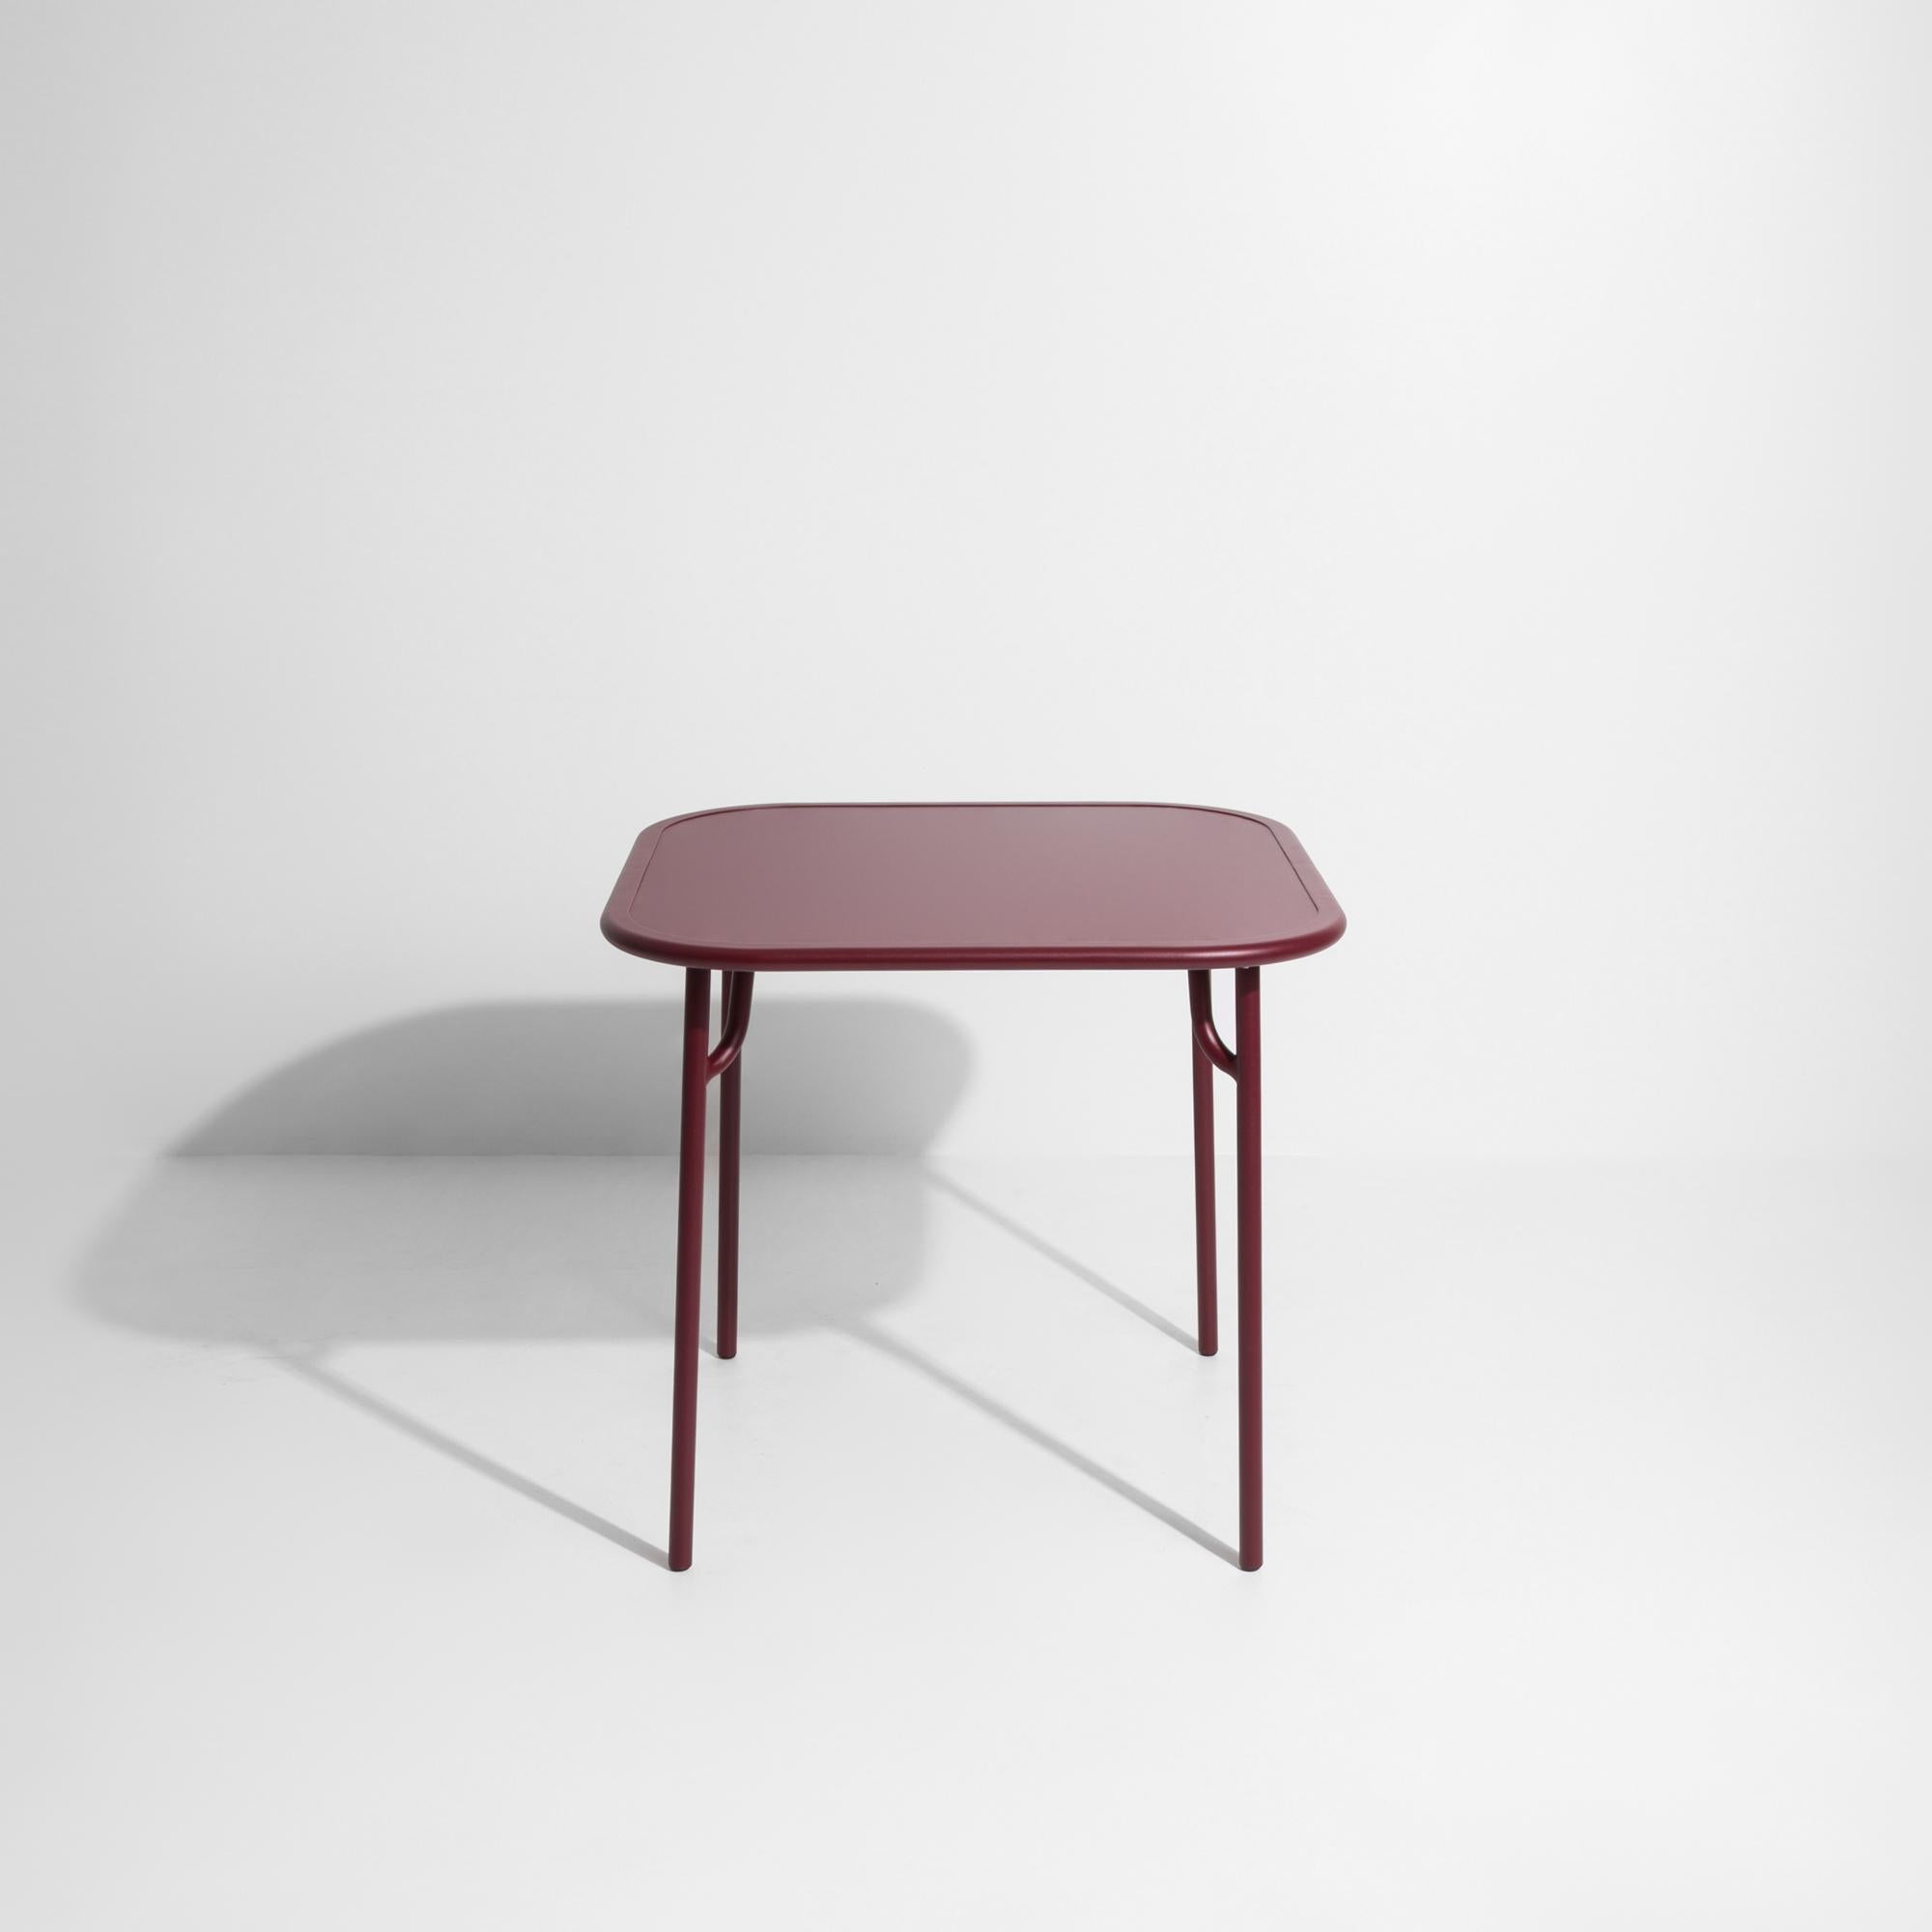 Petite Friture Week-End Plain Square Dining Table in Burgundy Aluminium by Studio BrichetZiegler, 2017

The week-end collection is a full range of outdoor furniture, in aluminium grained epoxy paint, matt finish, that includes 18 functions and 8